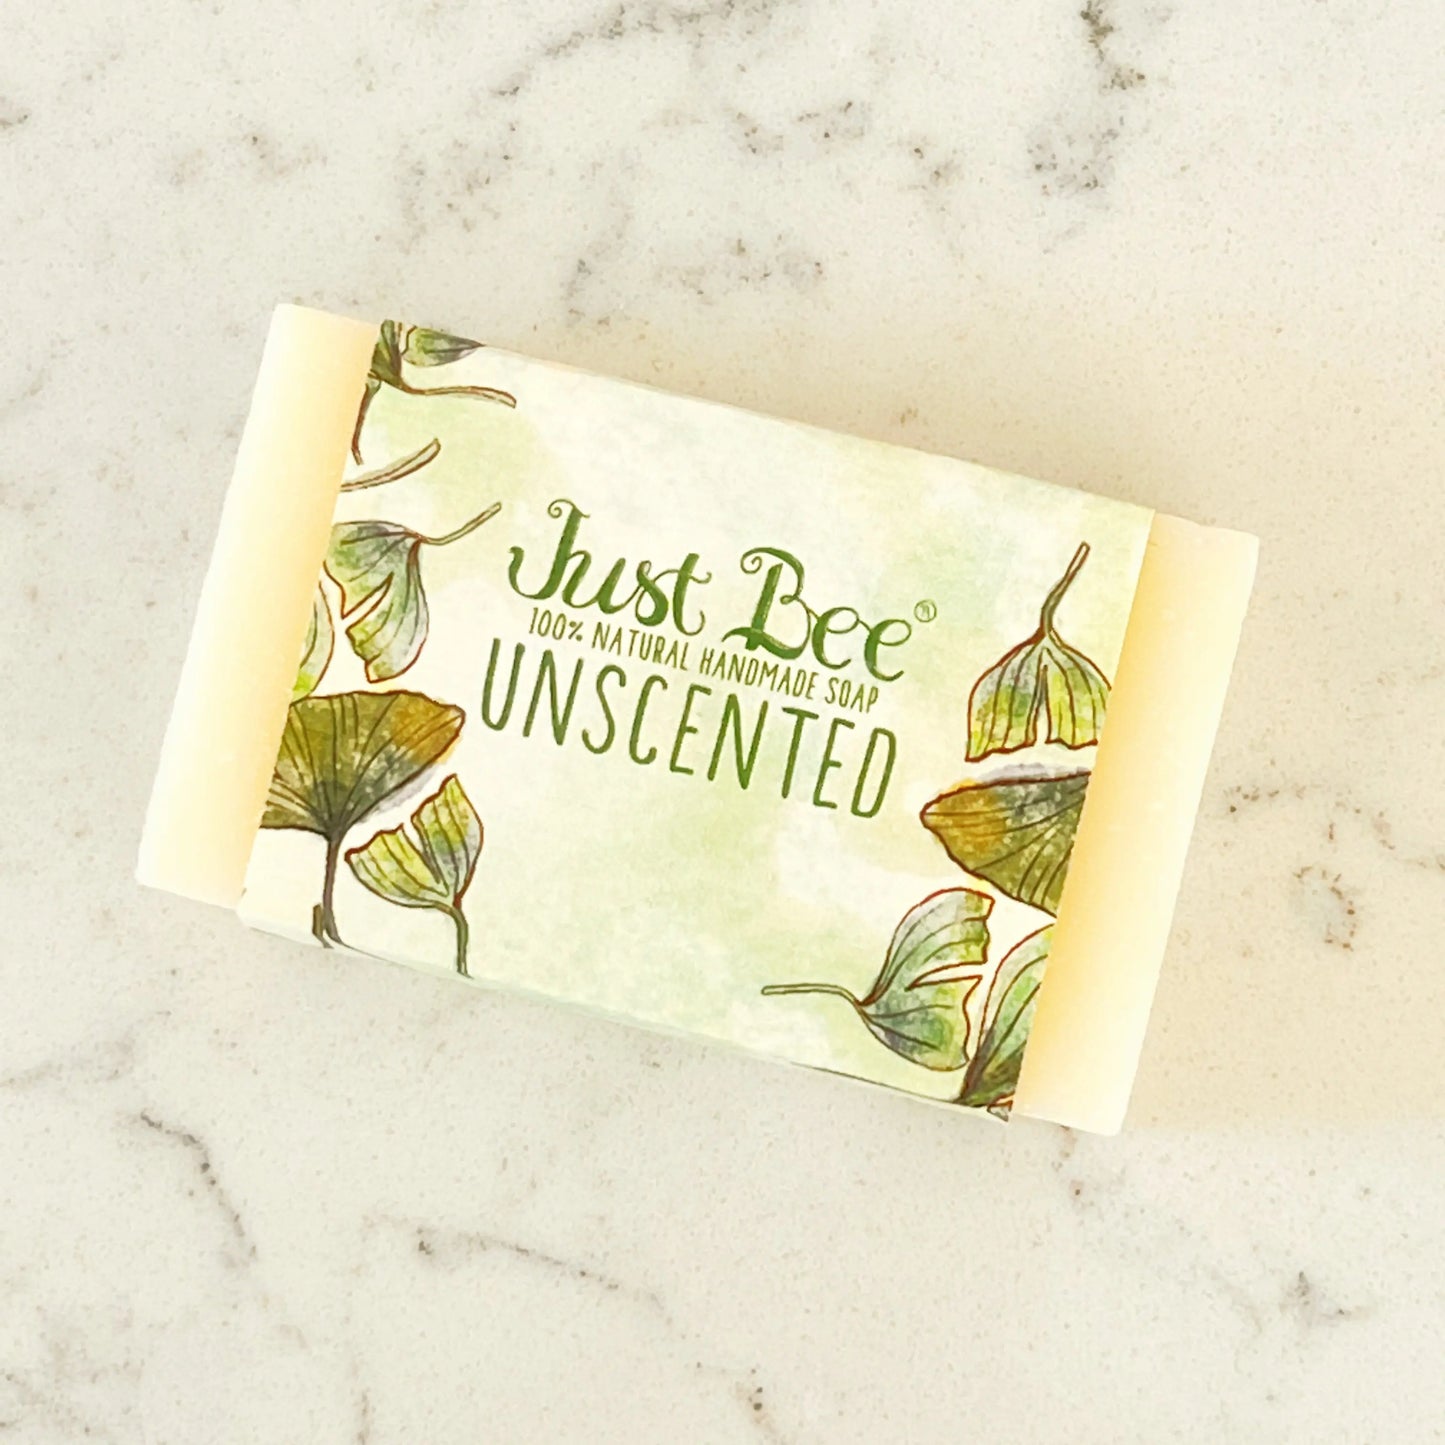 Unscented Soap Just Bee Cosmetics